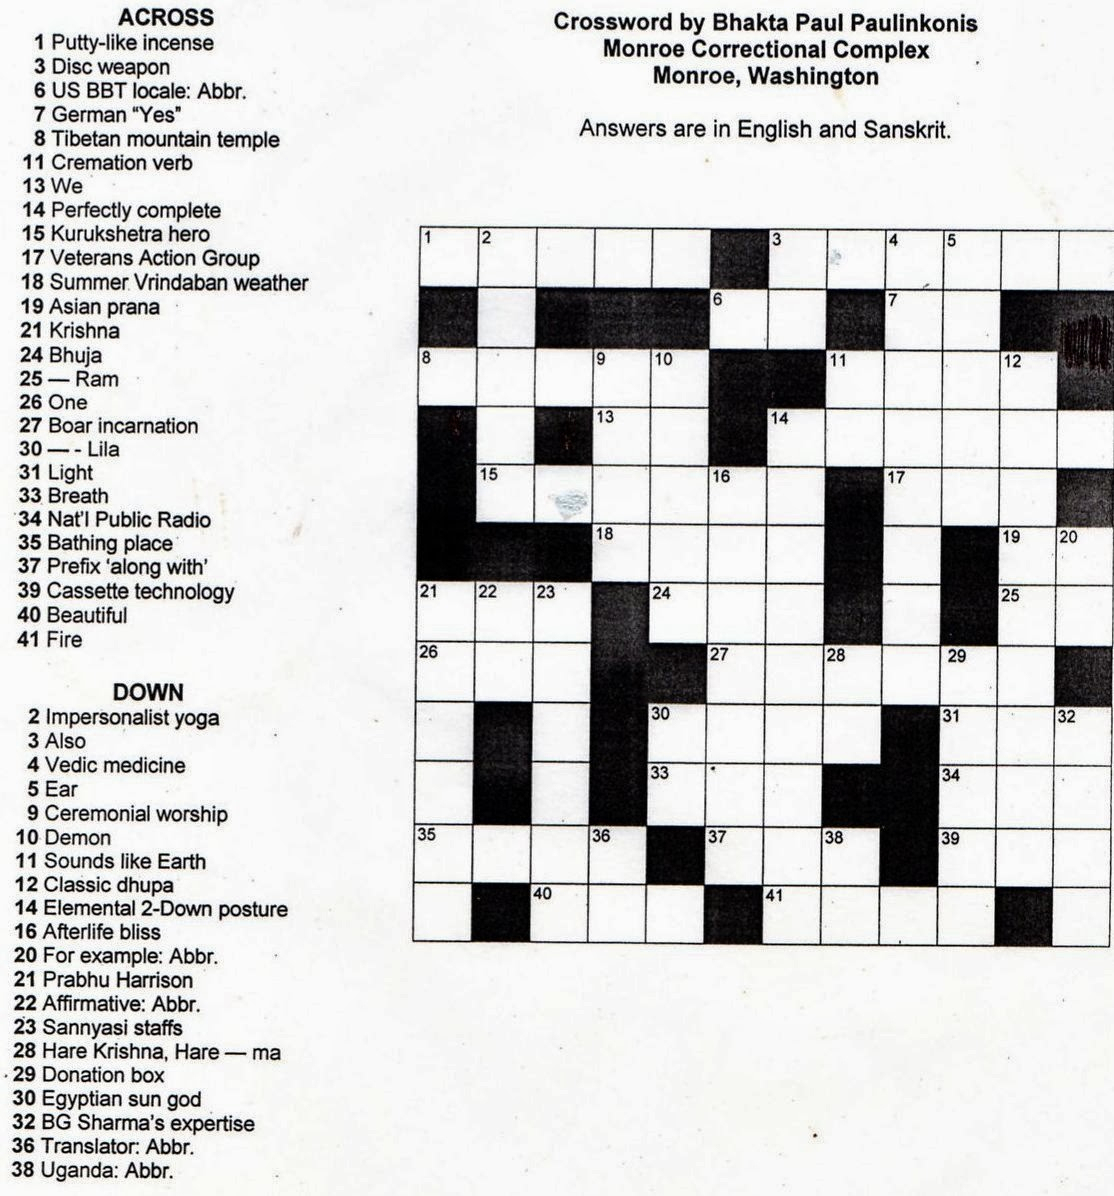 Fun Printable Crossword Puzzles For High School Students